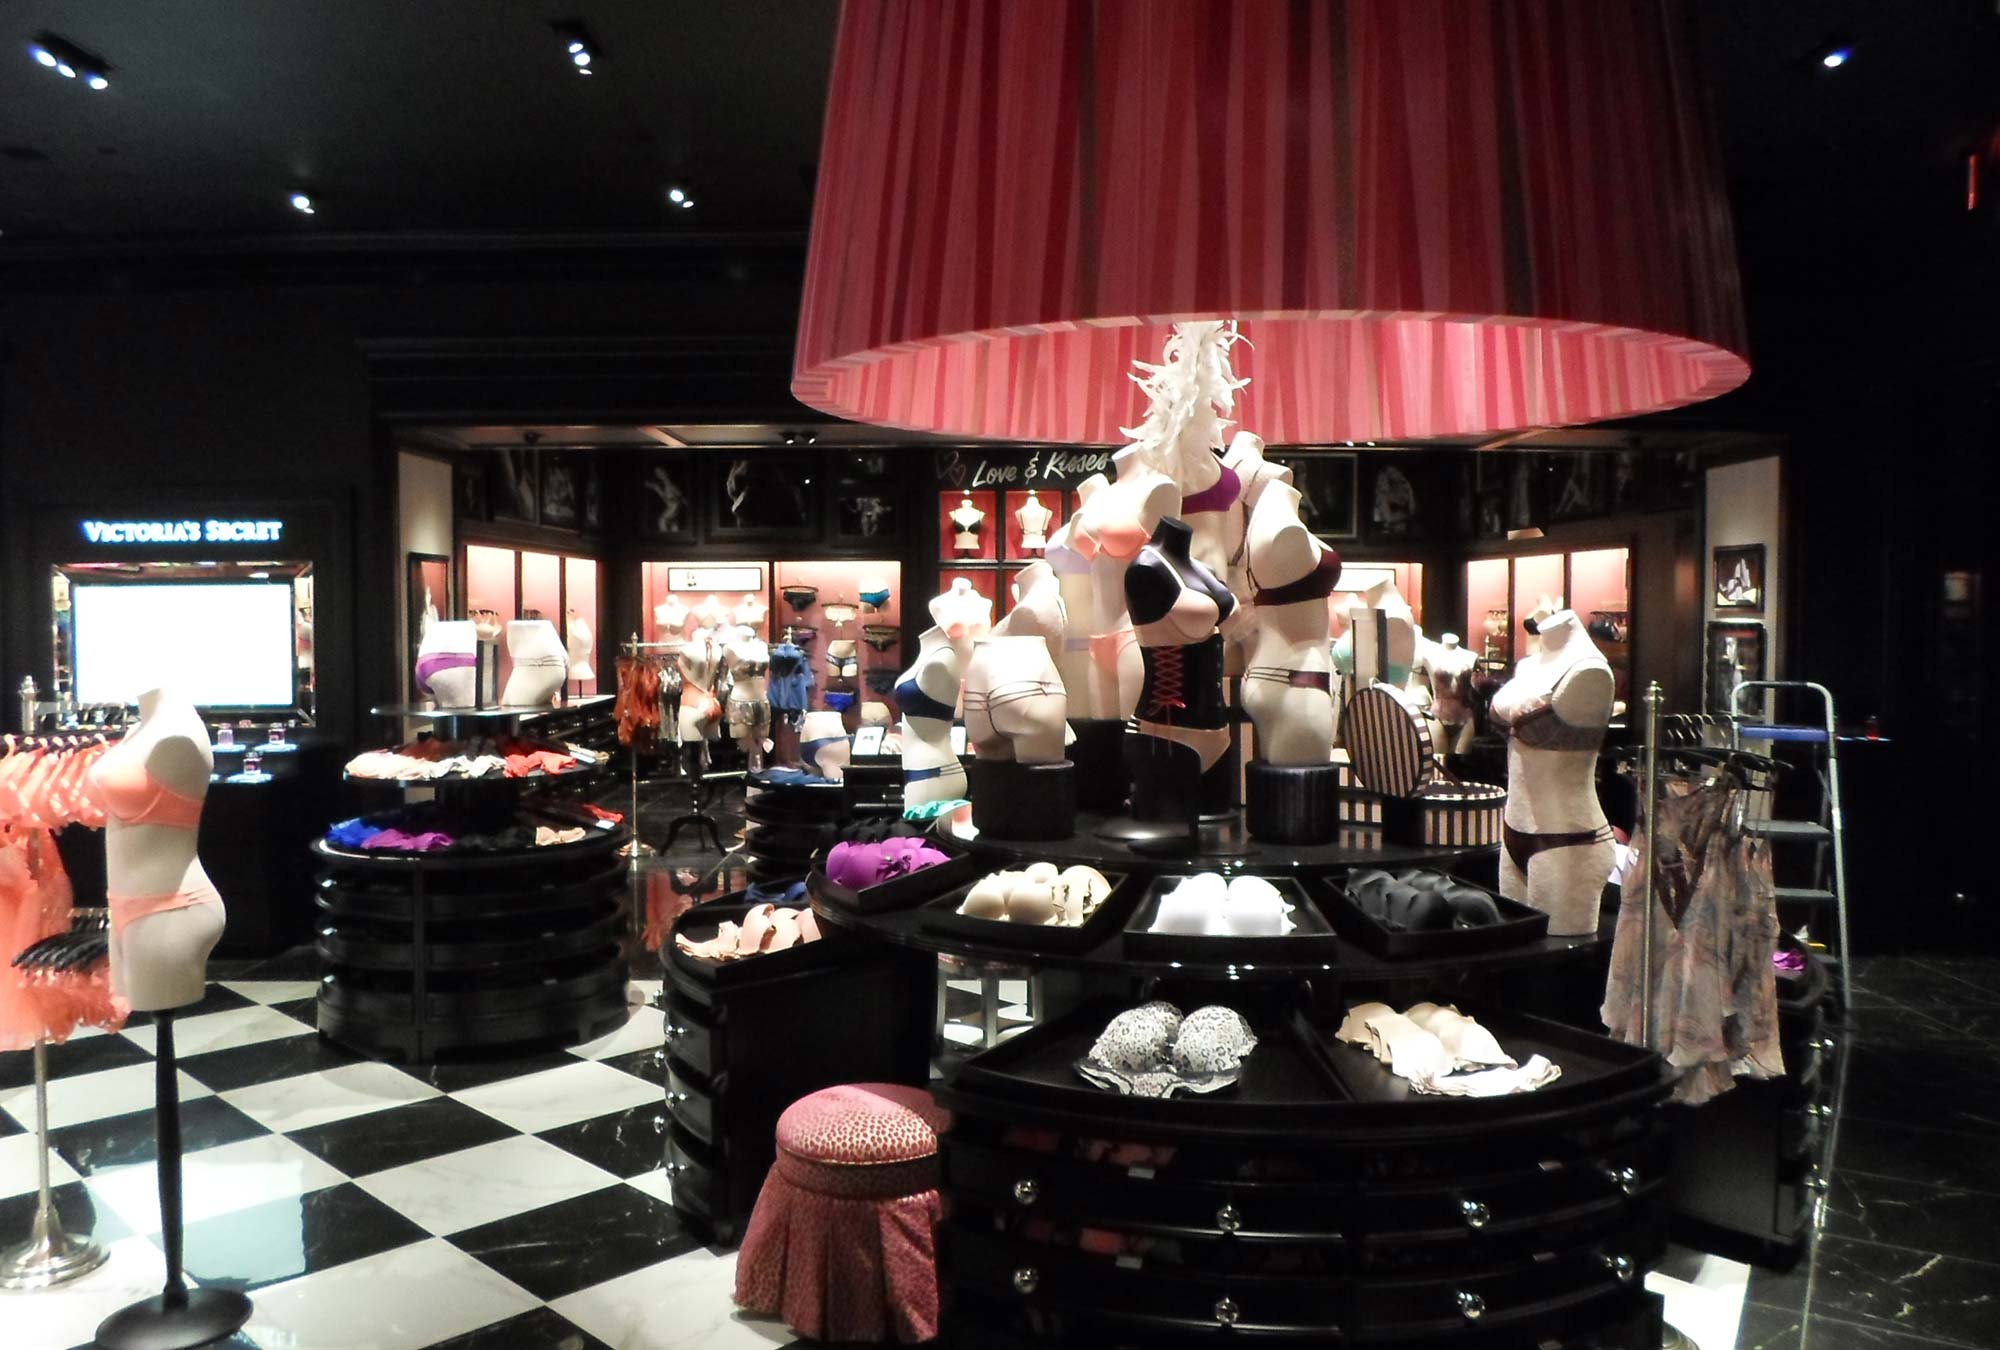 Victorias Secret Retail Contractor Beachwood OH Display Center by Fred Olivieri